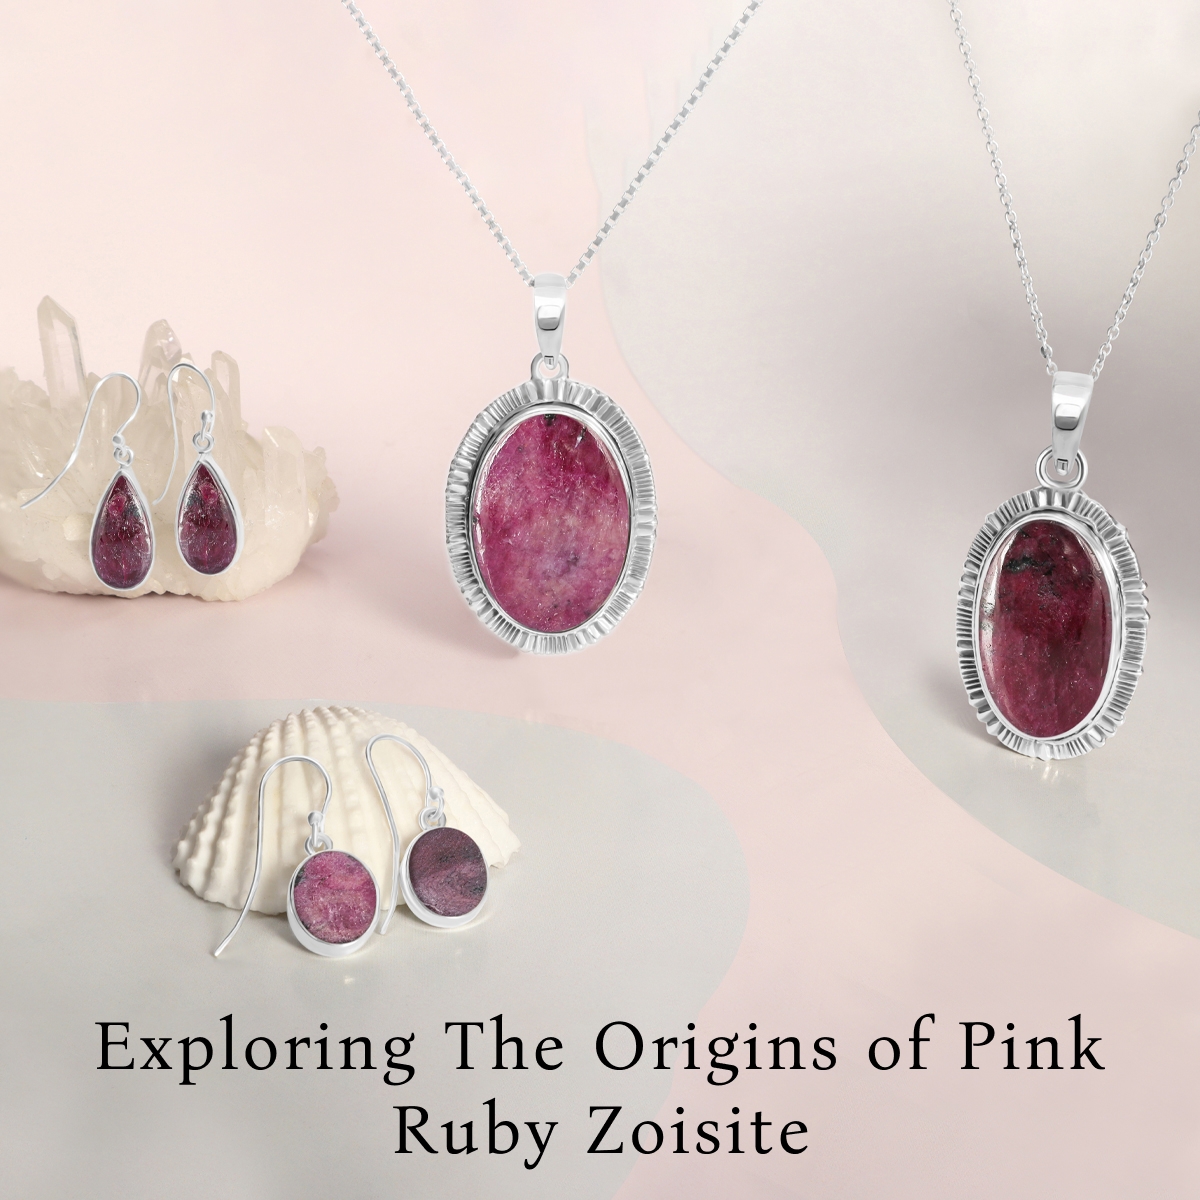 History and Origin of Pink Ruby Zoisite